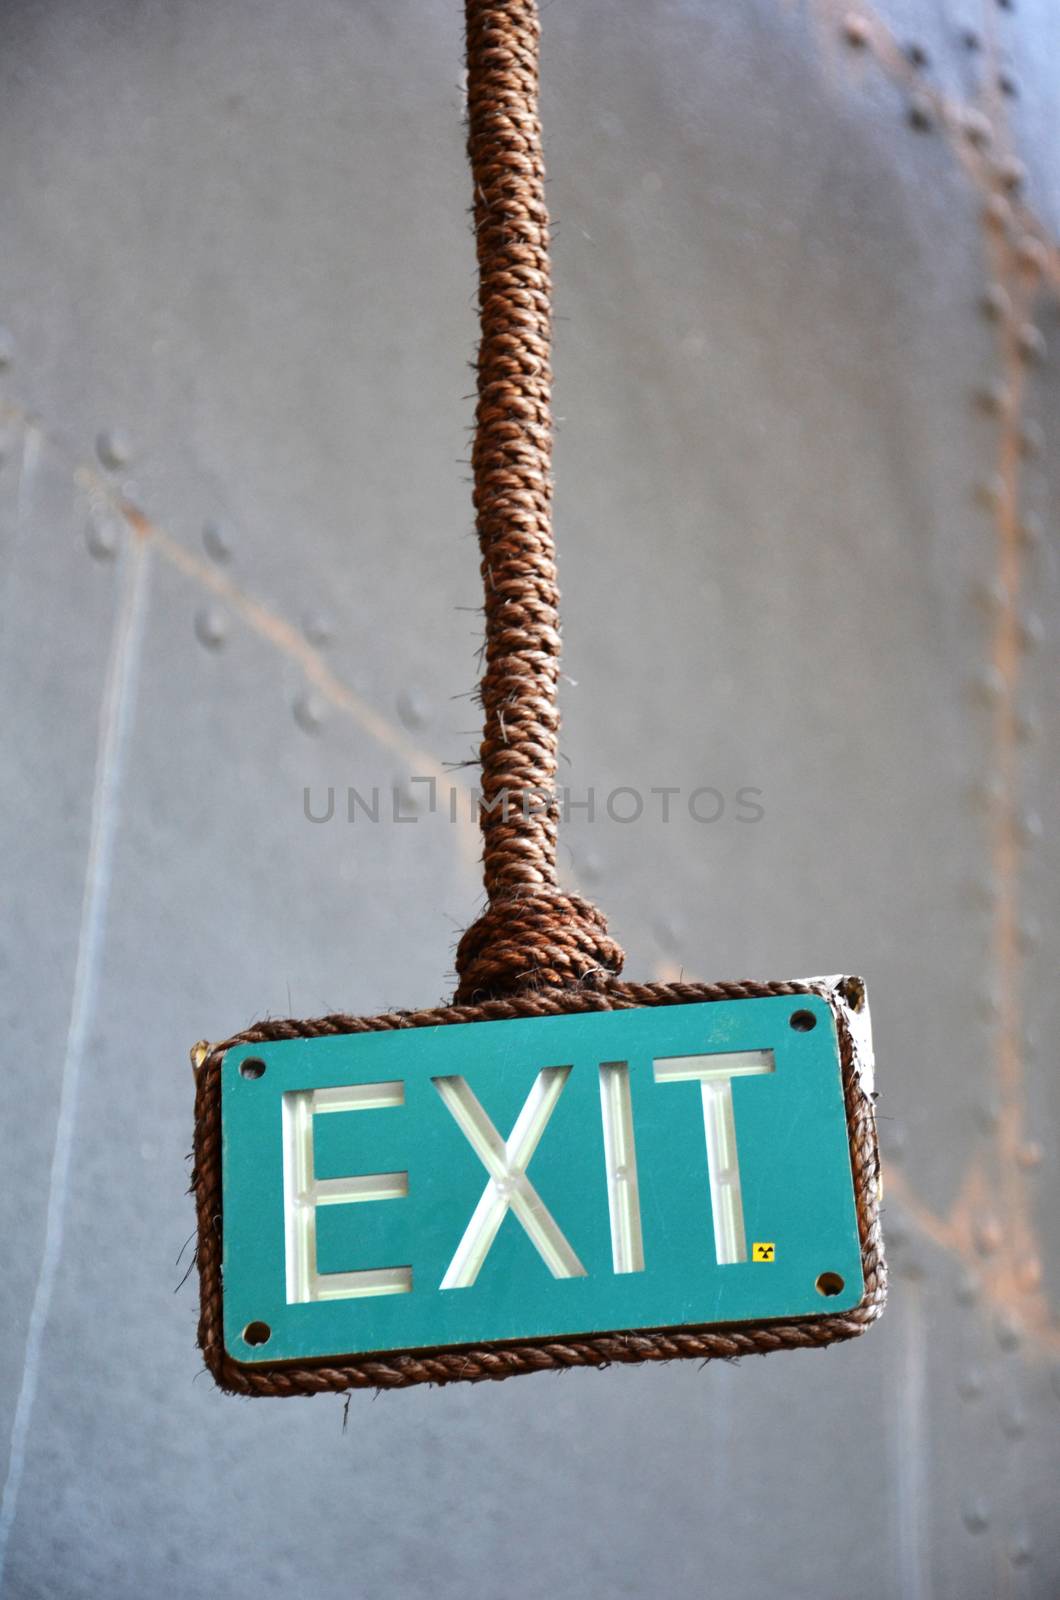 Exit sign points the way out of building